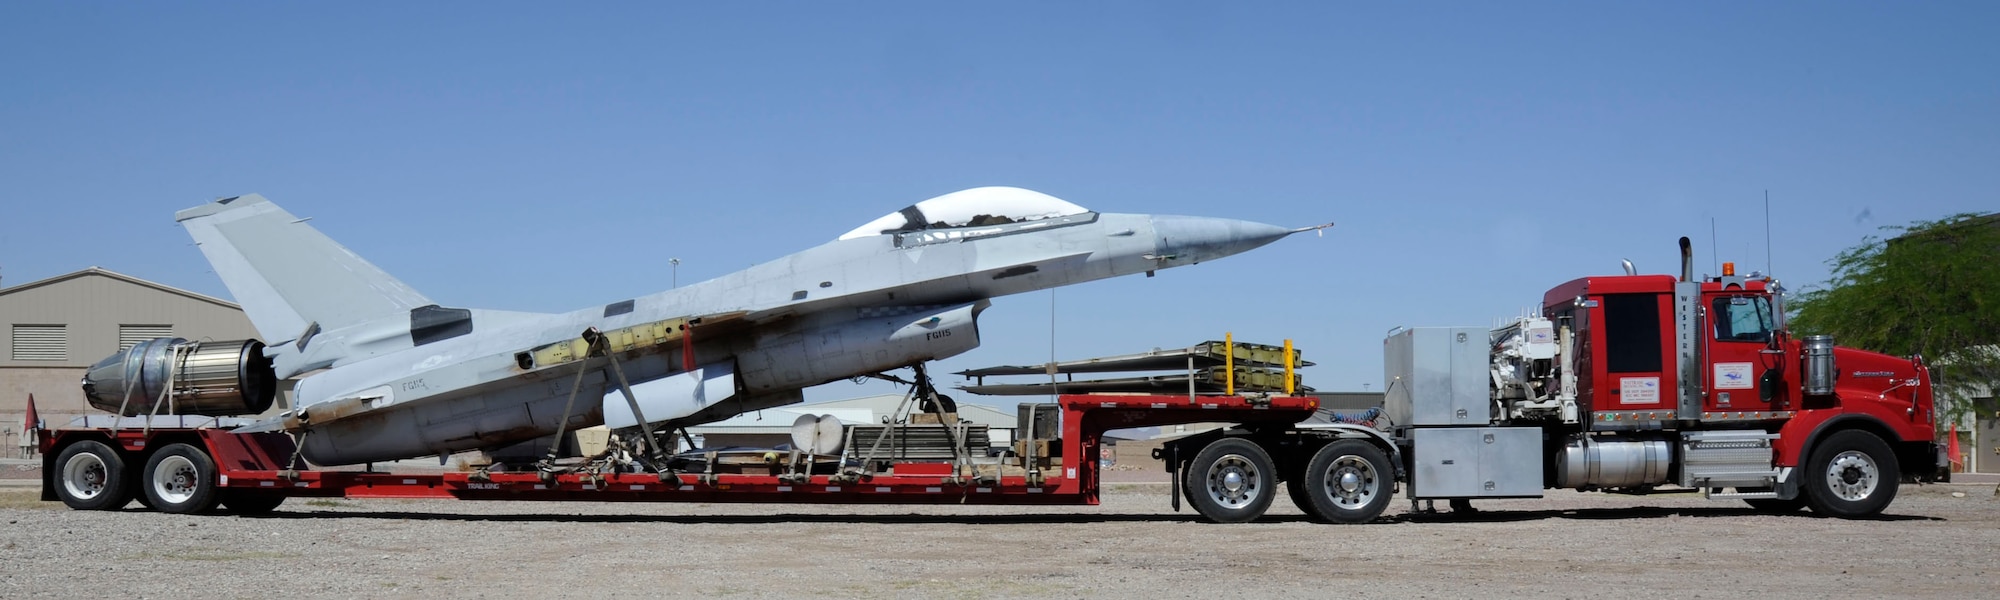 A disassembled F-16 Fighting Falcon sits on the bed of an 18-wheeler at Davis-Monthan Air Force Base, Ariz., April 30, 2014. The aircraft was received from the 309th Aircraft Maintenance and Regeneration Group and disassembled by members of the 149th Fighter Wing during their recent temporary duty assignment to D-M. (U.S. Air Force photo by Airman 1st Class Betty R. Chevalier/Released)